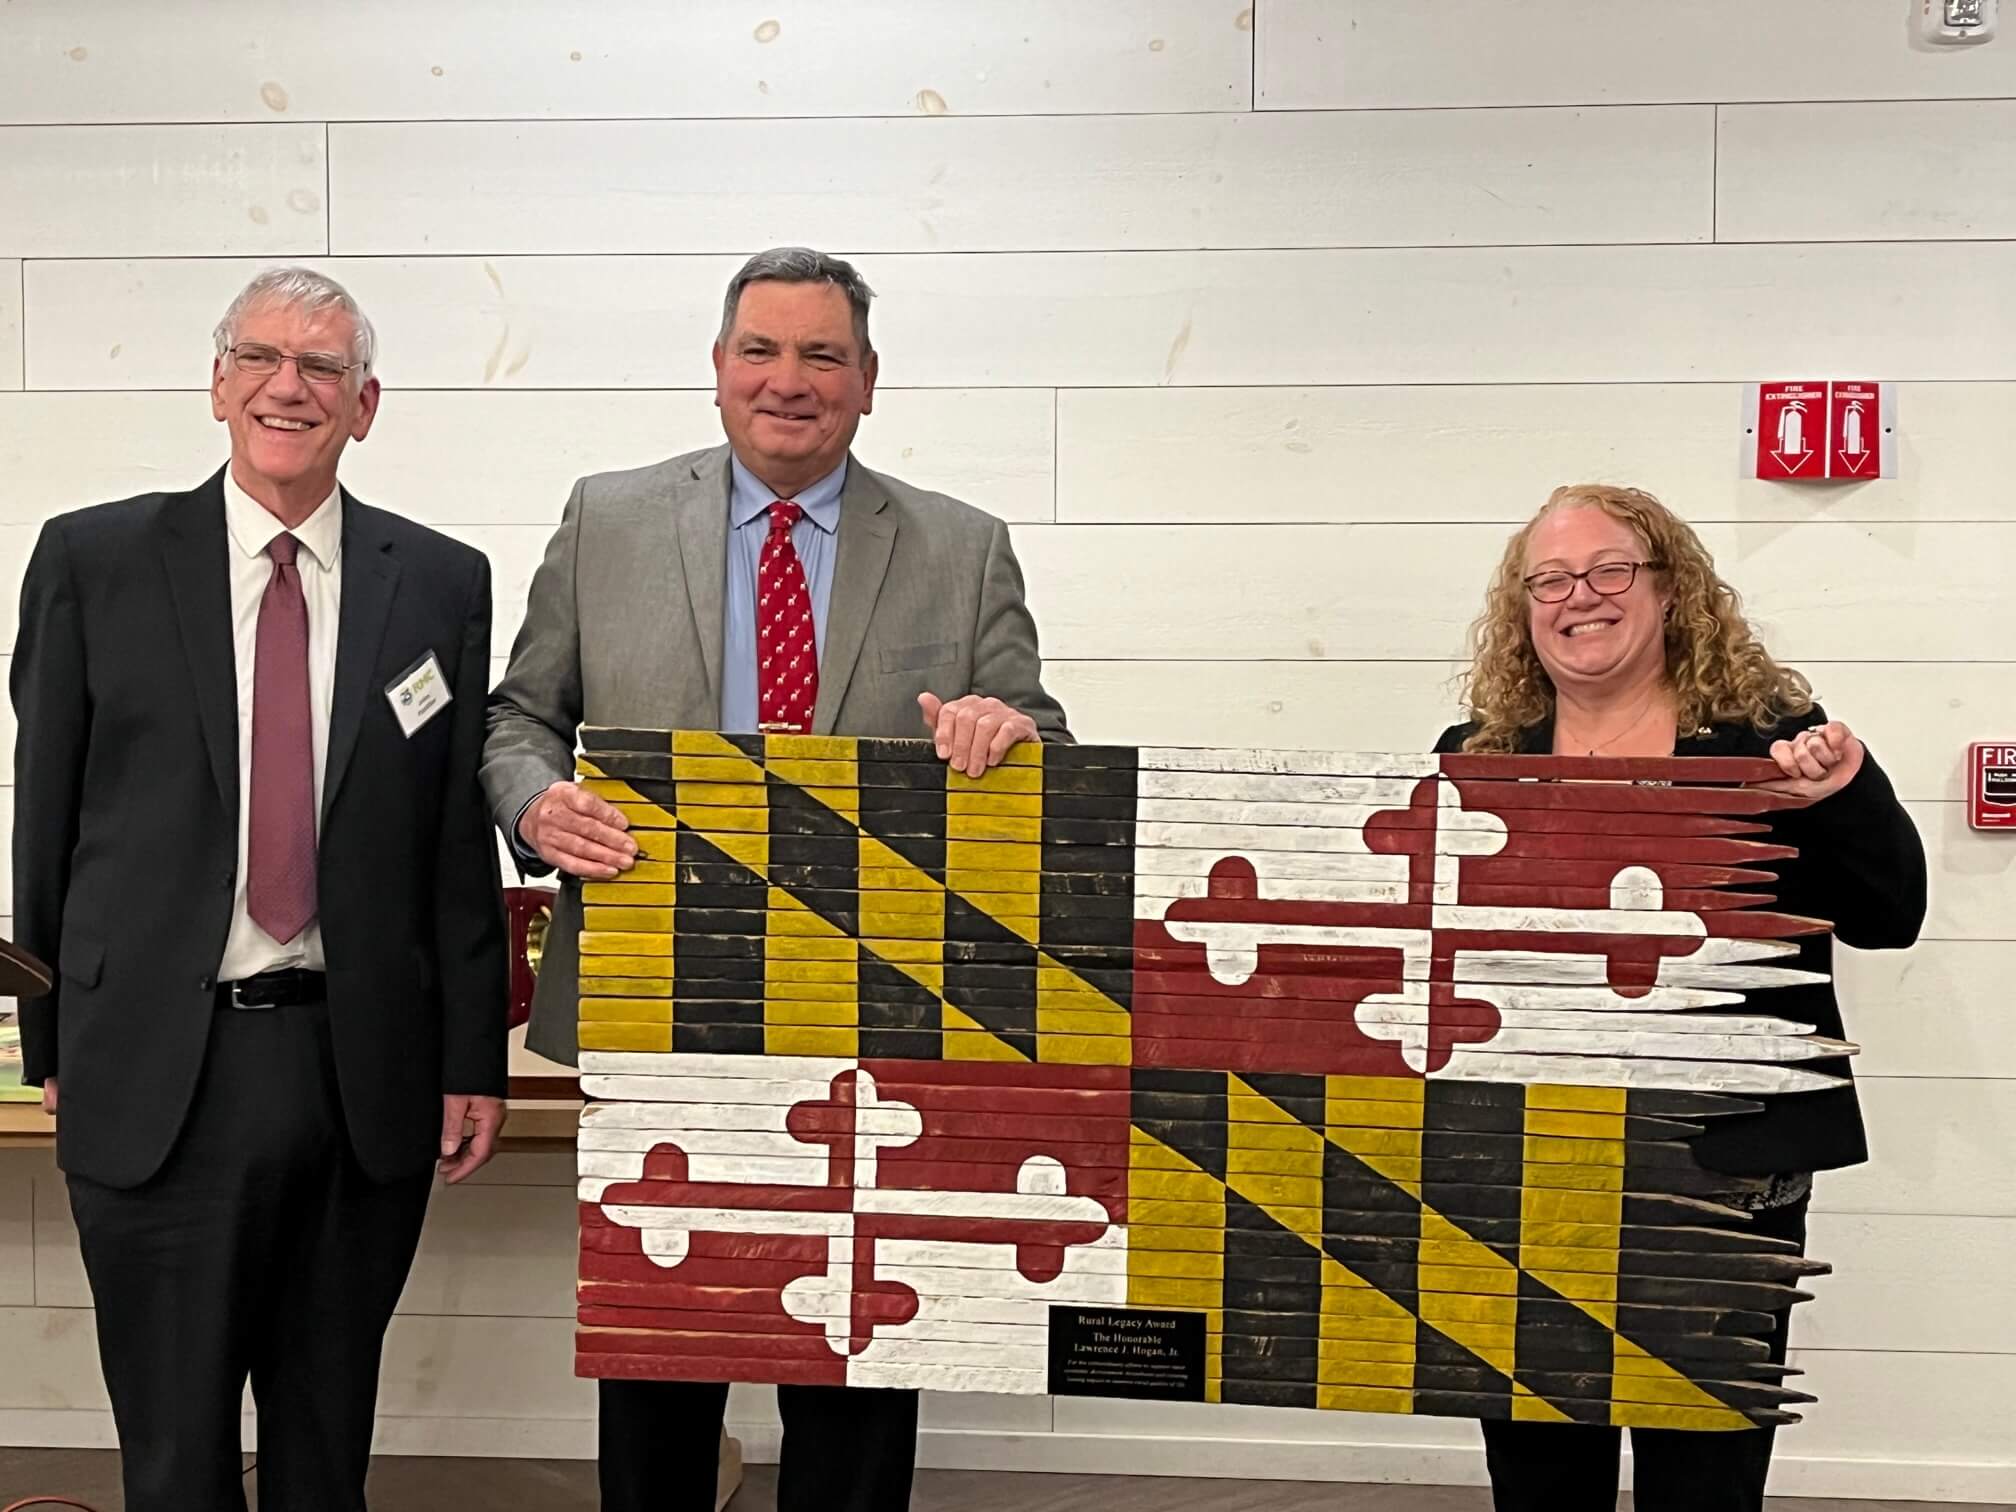 Rural Maryland Council begins New Year with New Board Leadership - Sec Bartenfelder